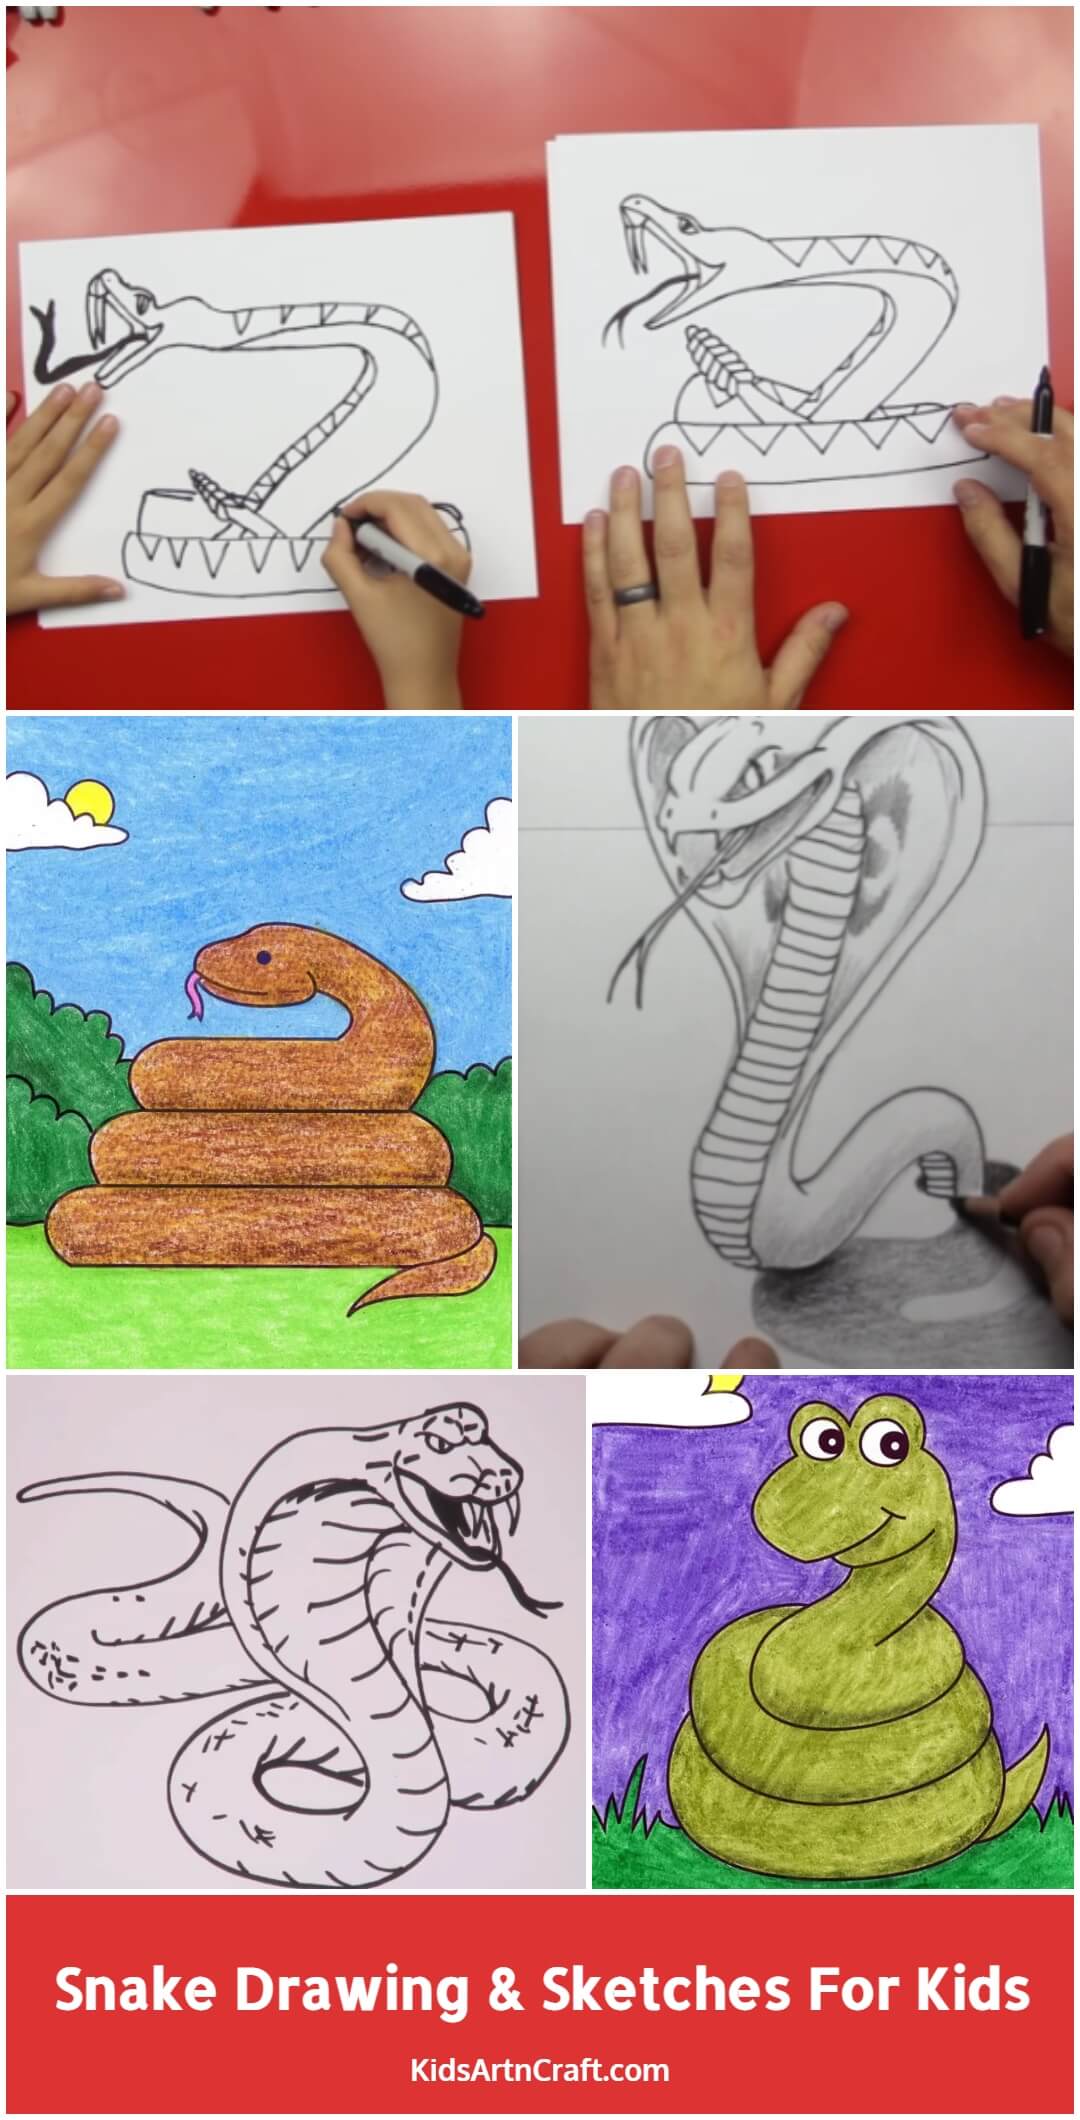 Snake Drawing & Sketches for Kids